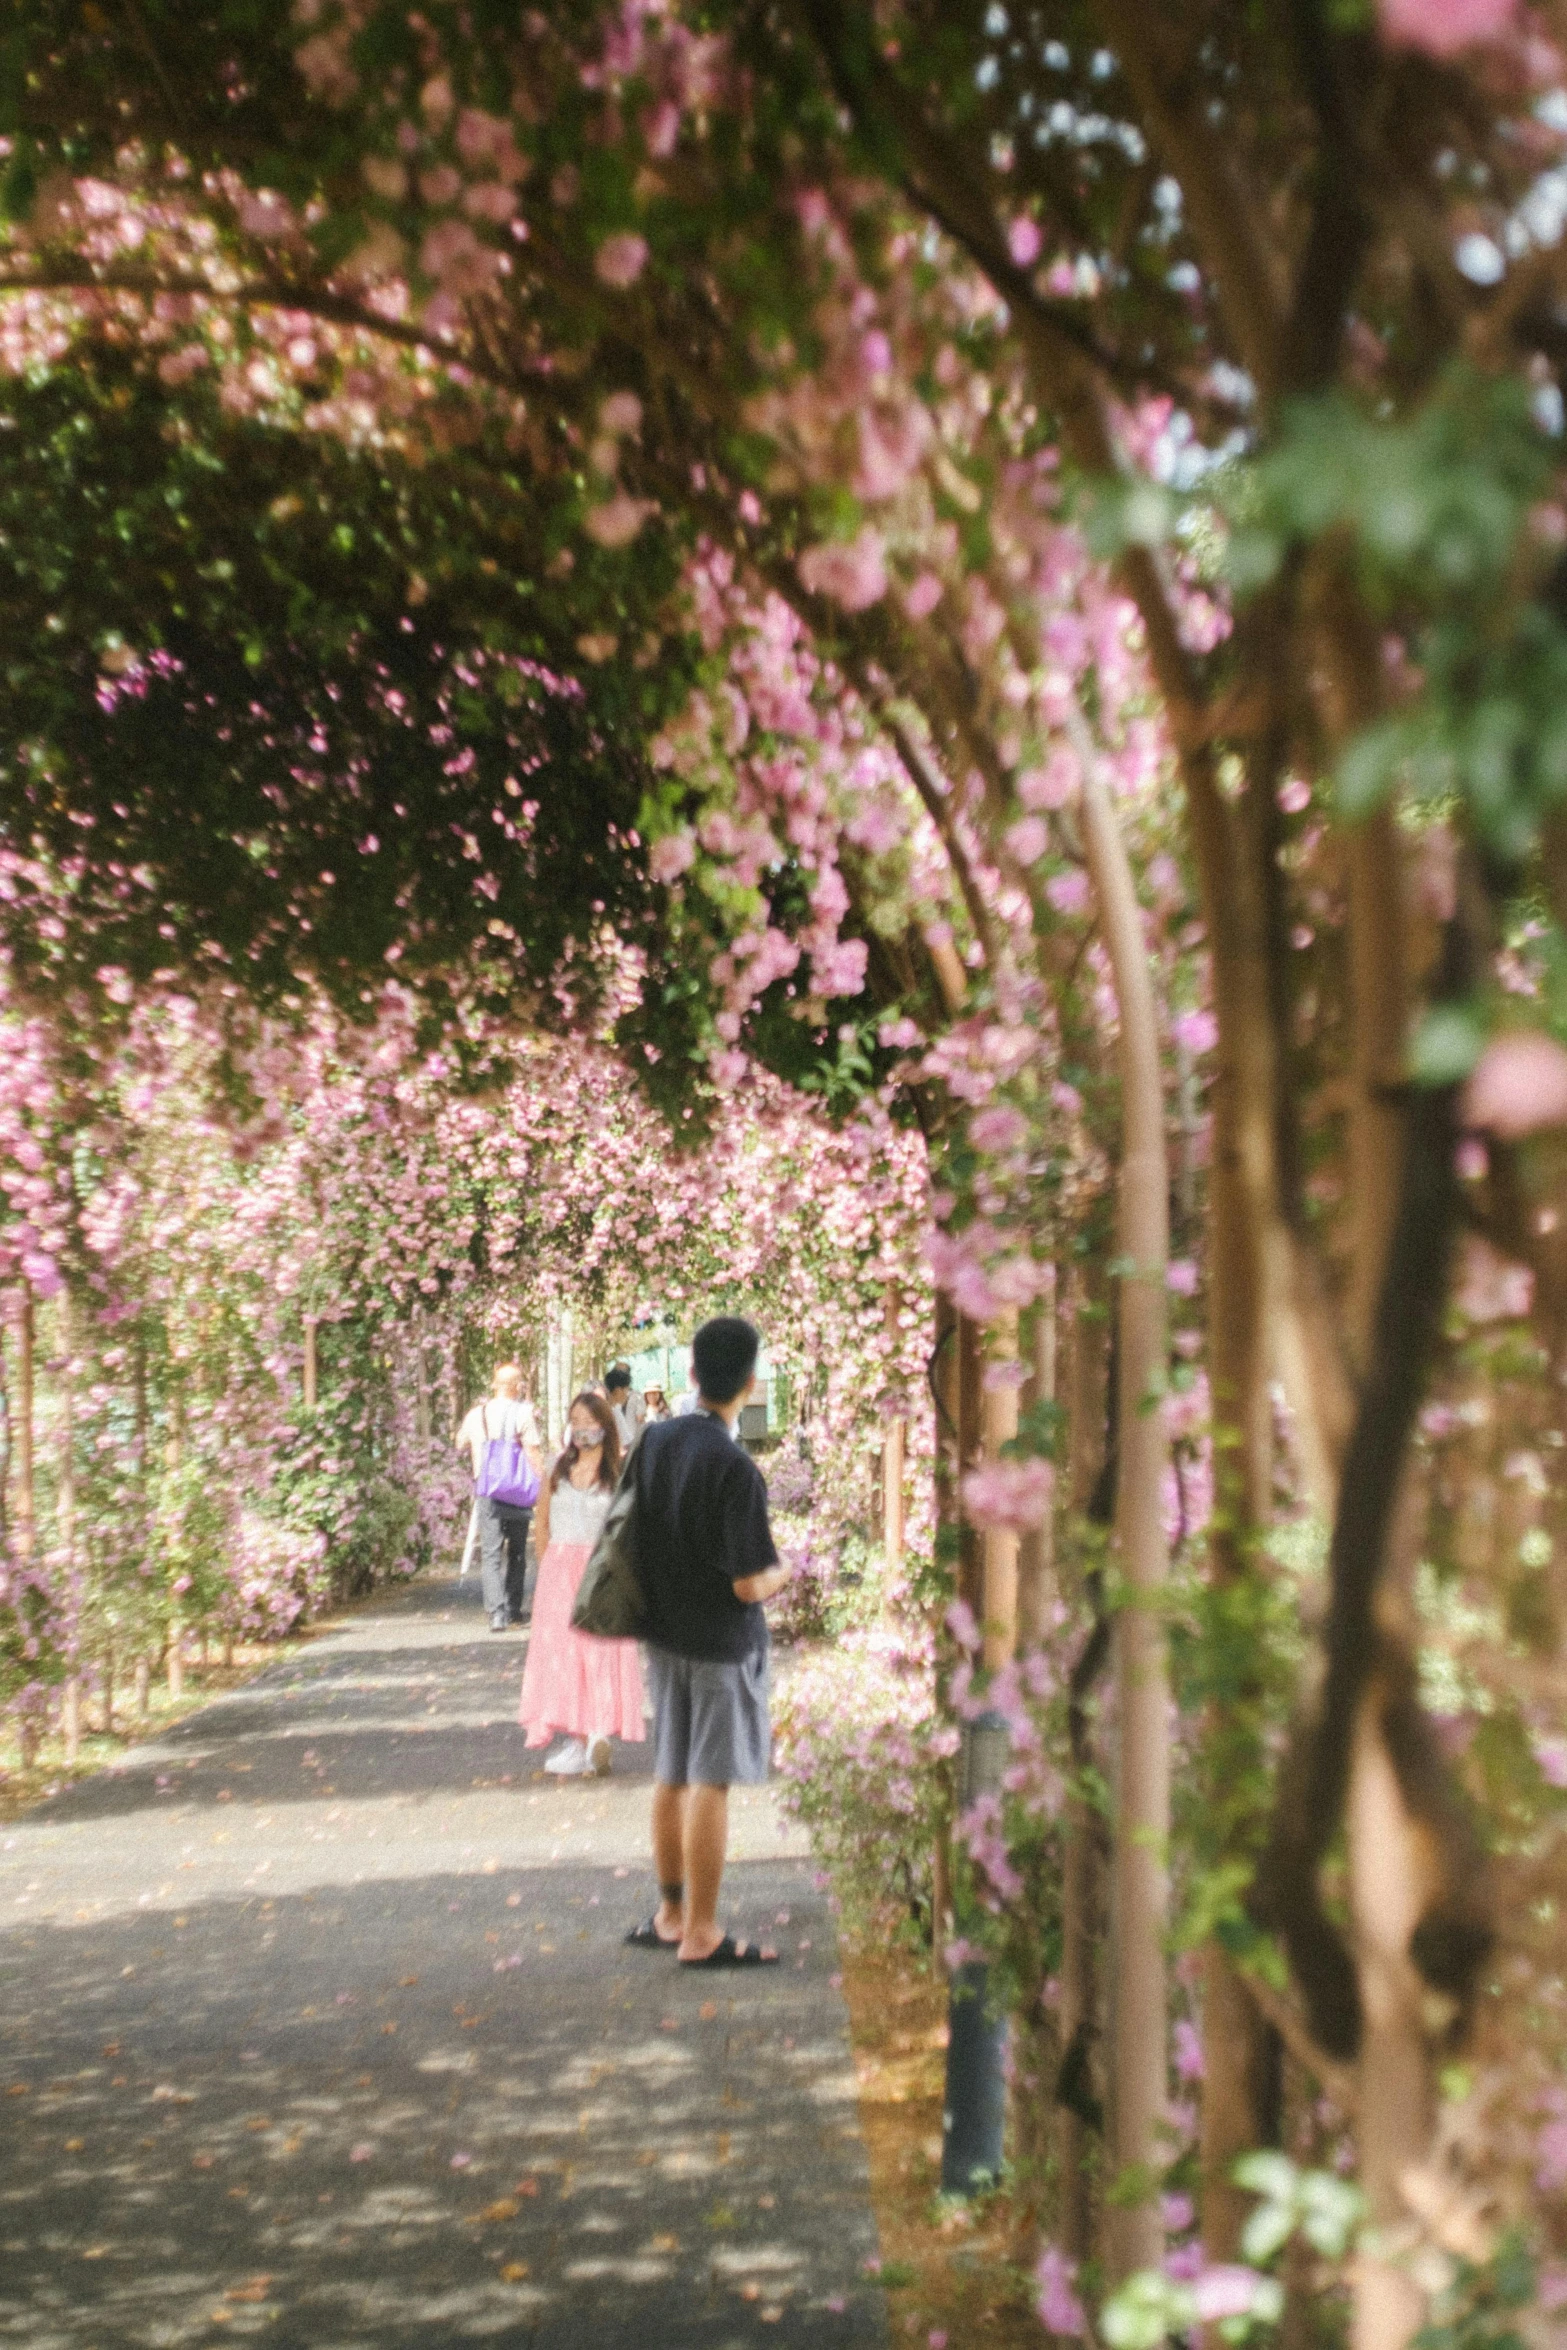 many people are walking down the road near pink flowers